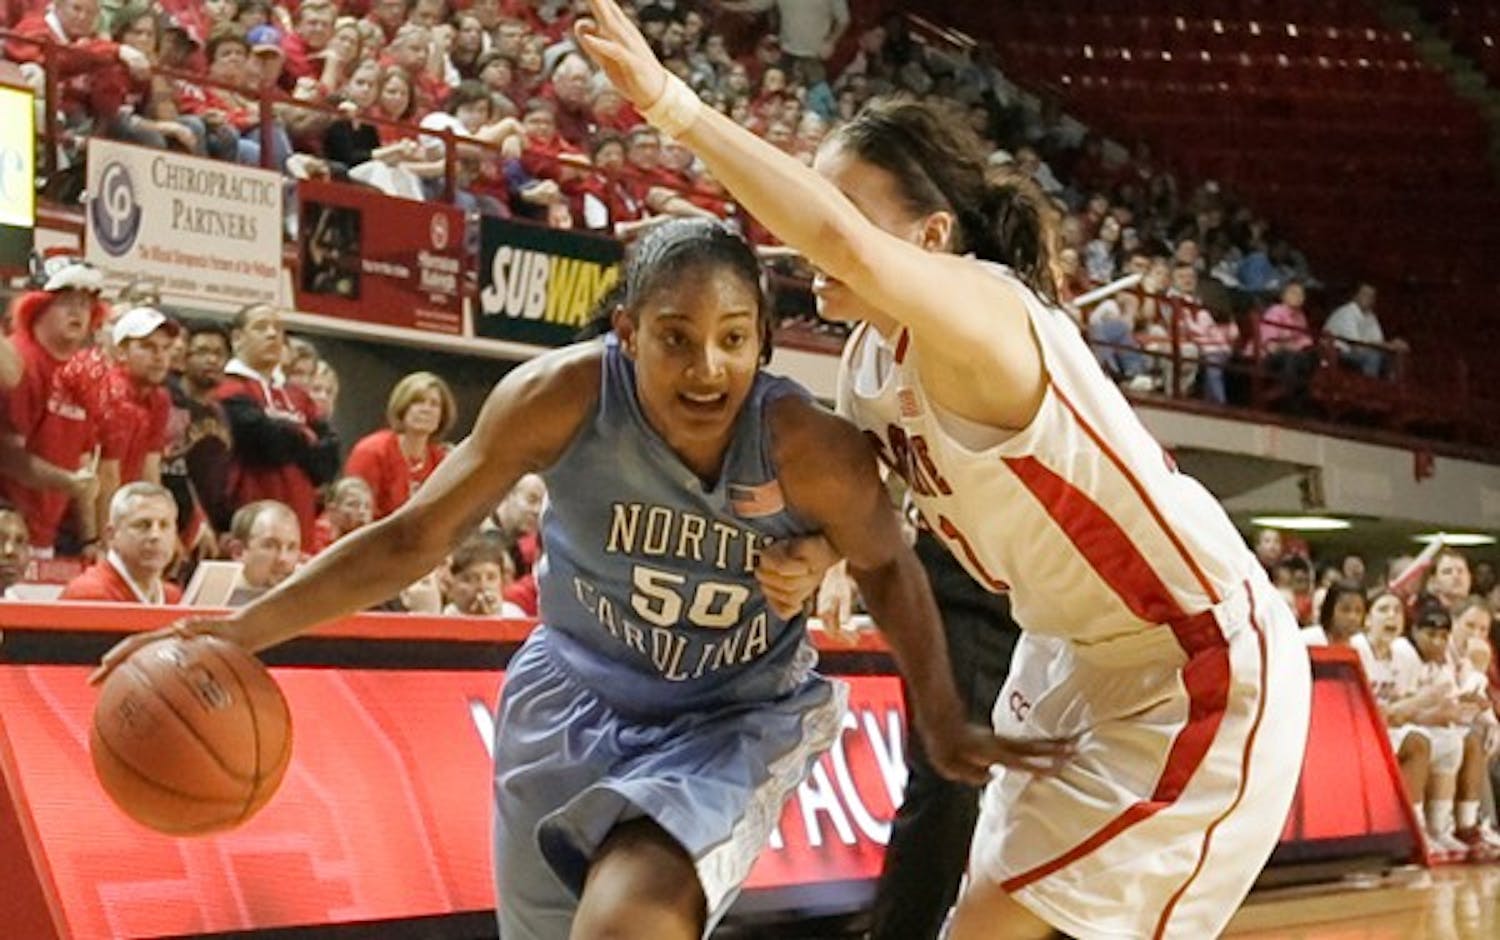 Italee Lucas made up for a poor first half with 28 second-half points to lead North Carolina to victory. DTH/Phong Dinh